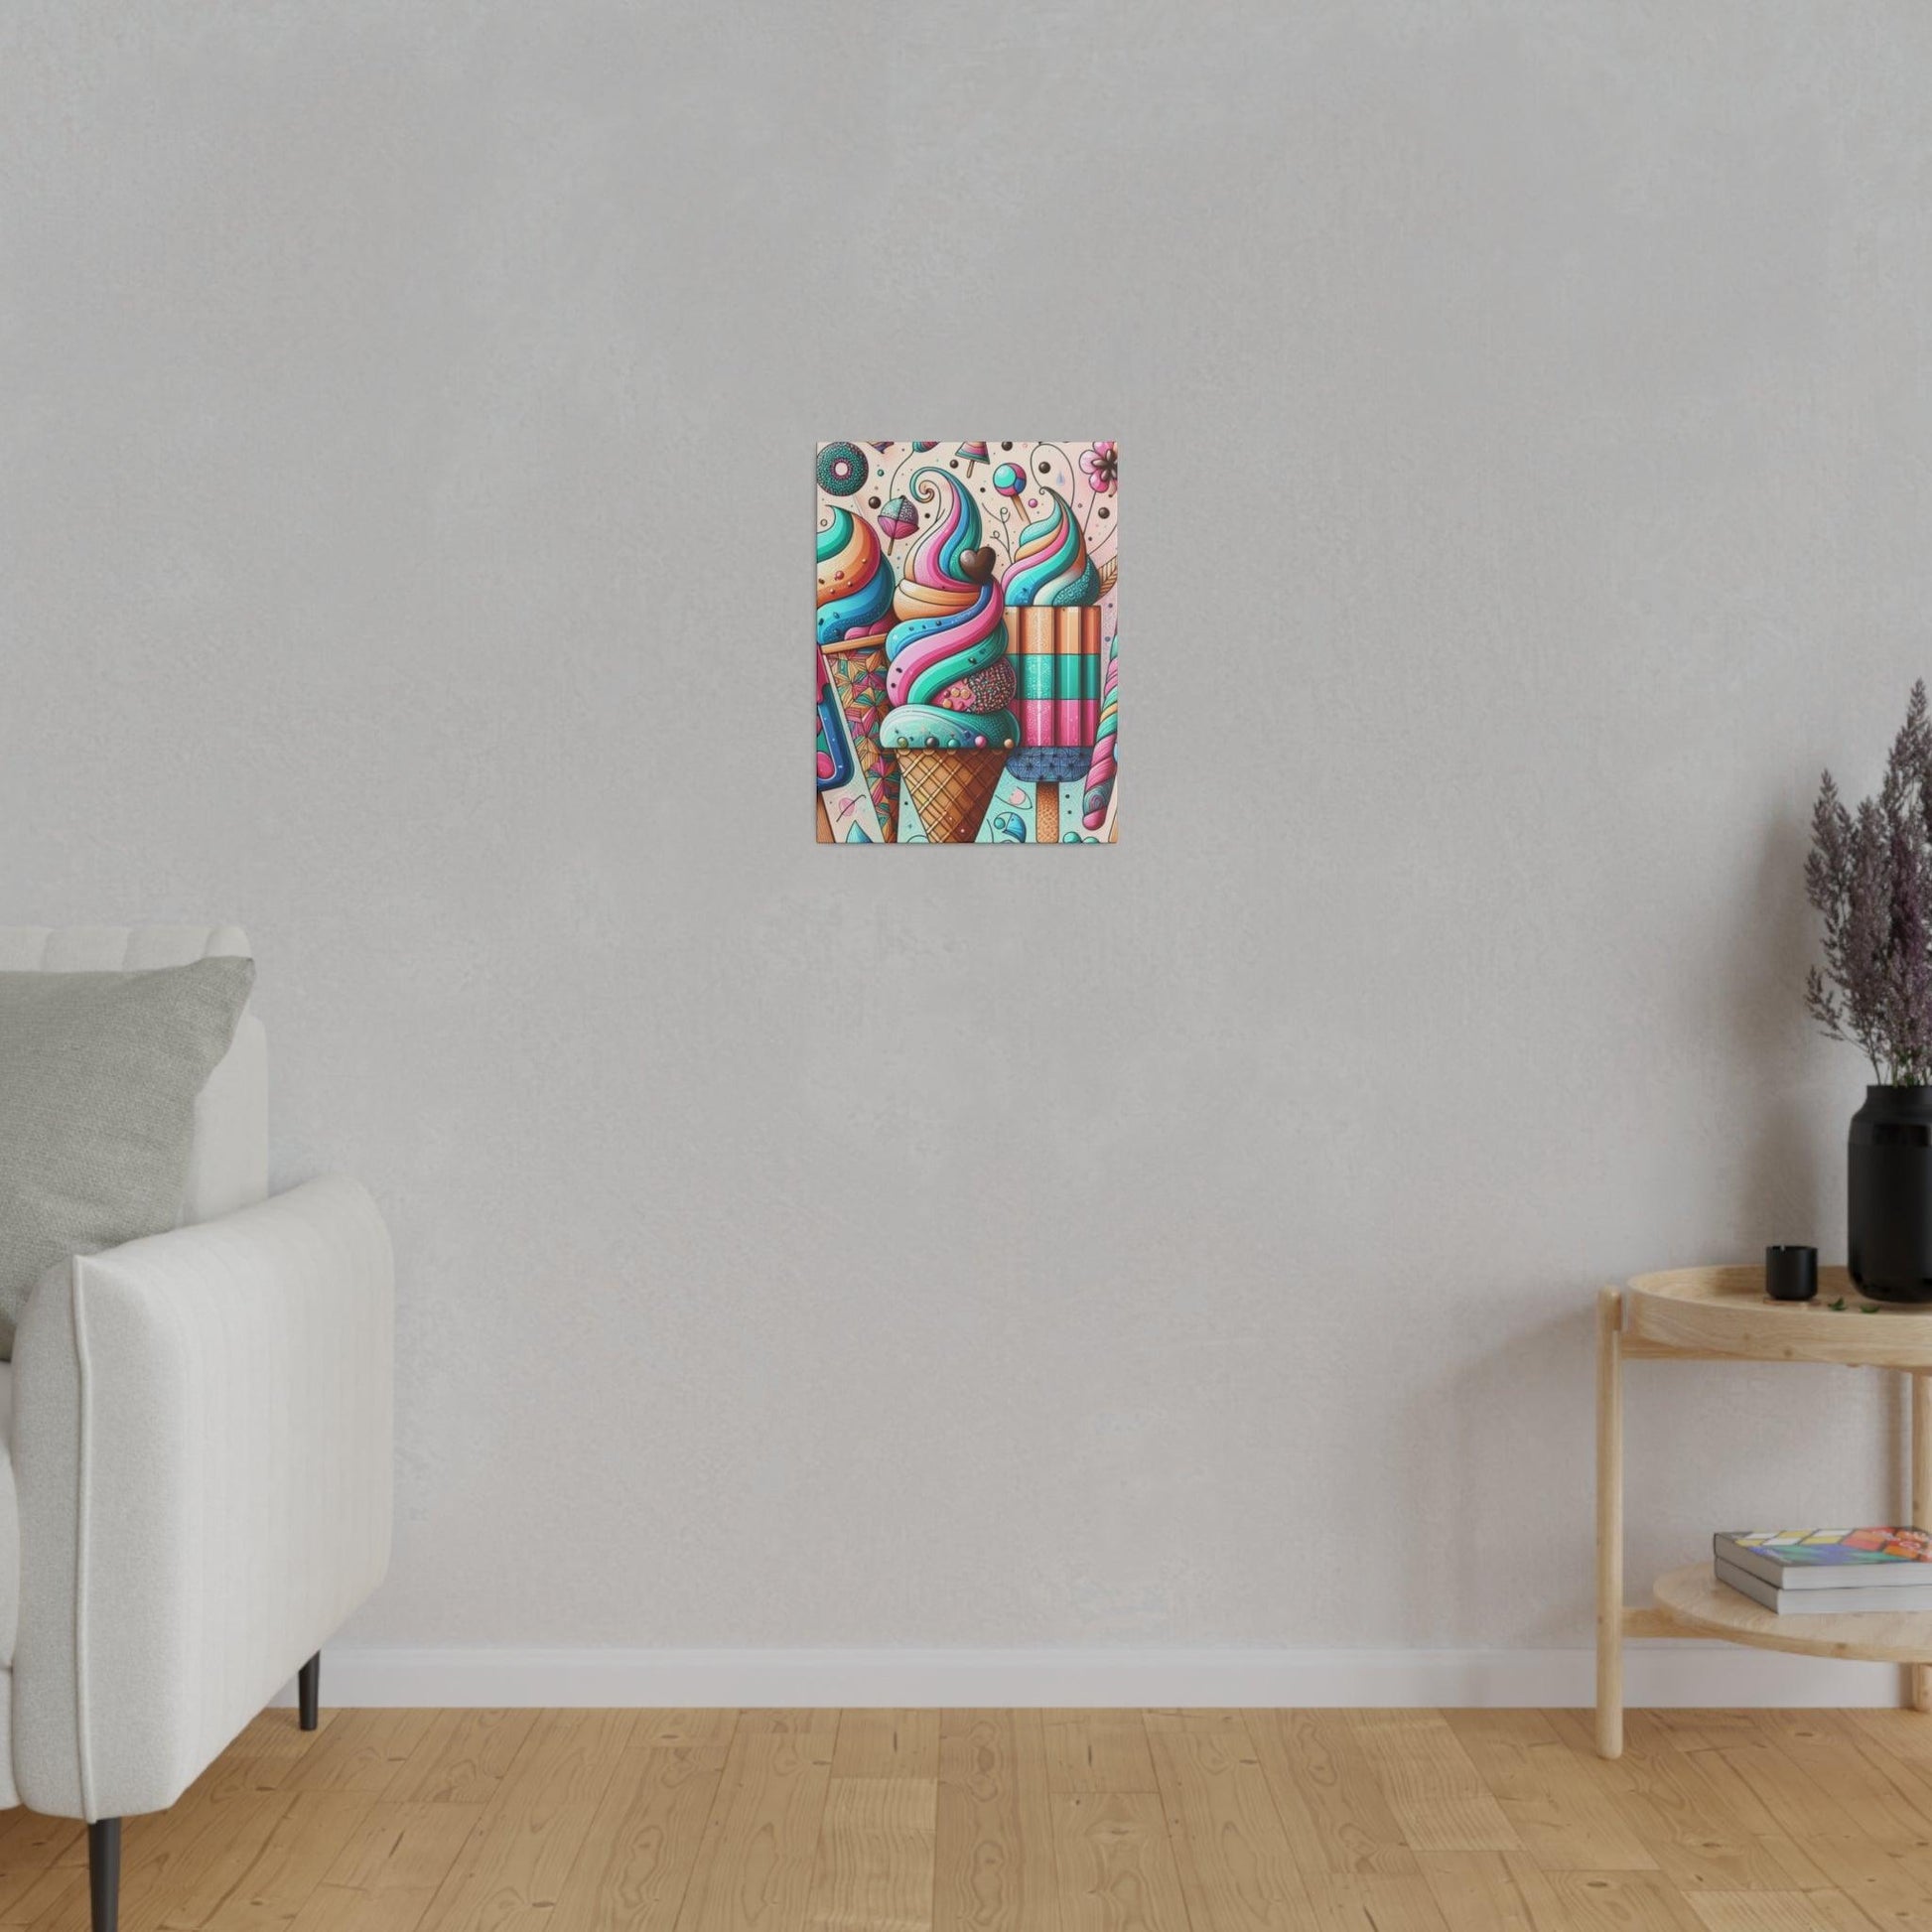 "Ice Cream Whimsy: Canvas Wall Art Extravaganza" - The Alice Gallery